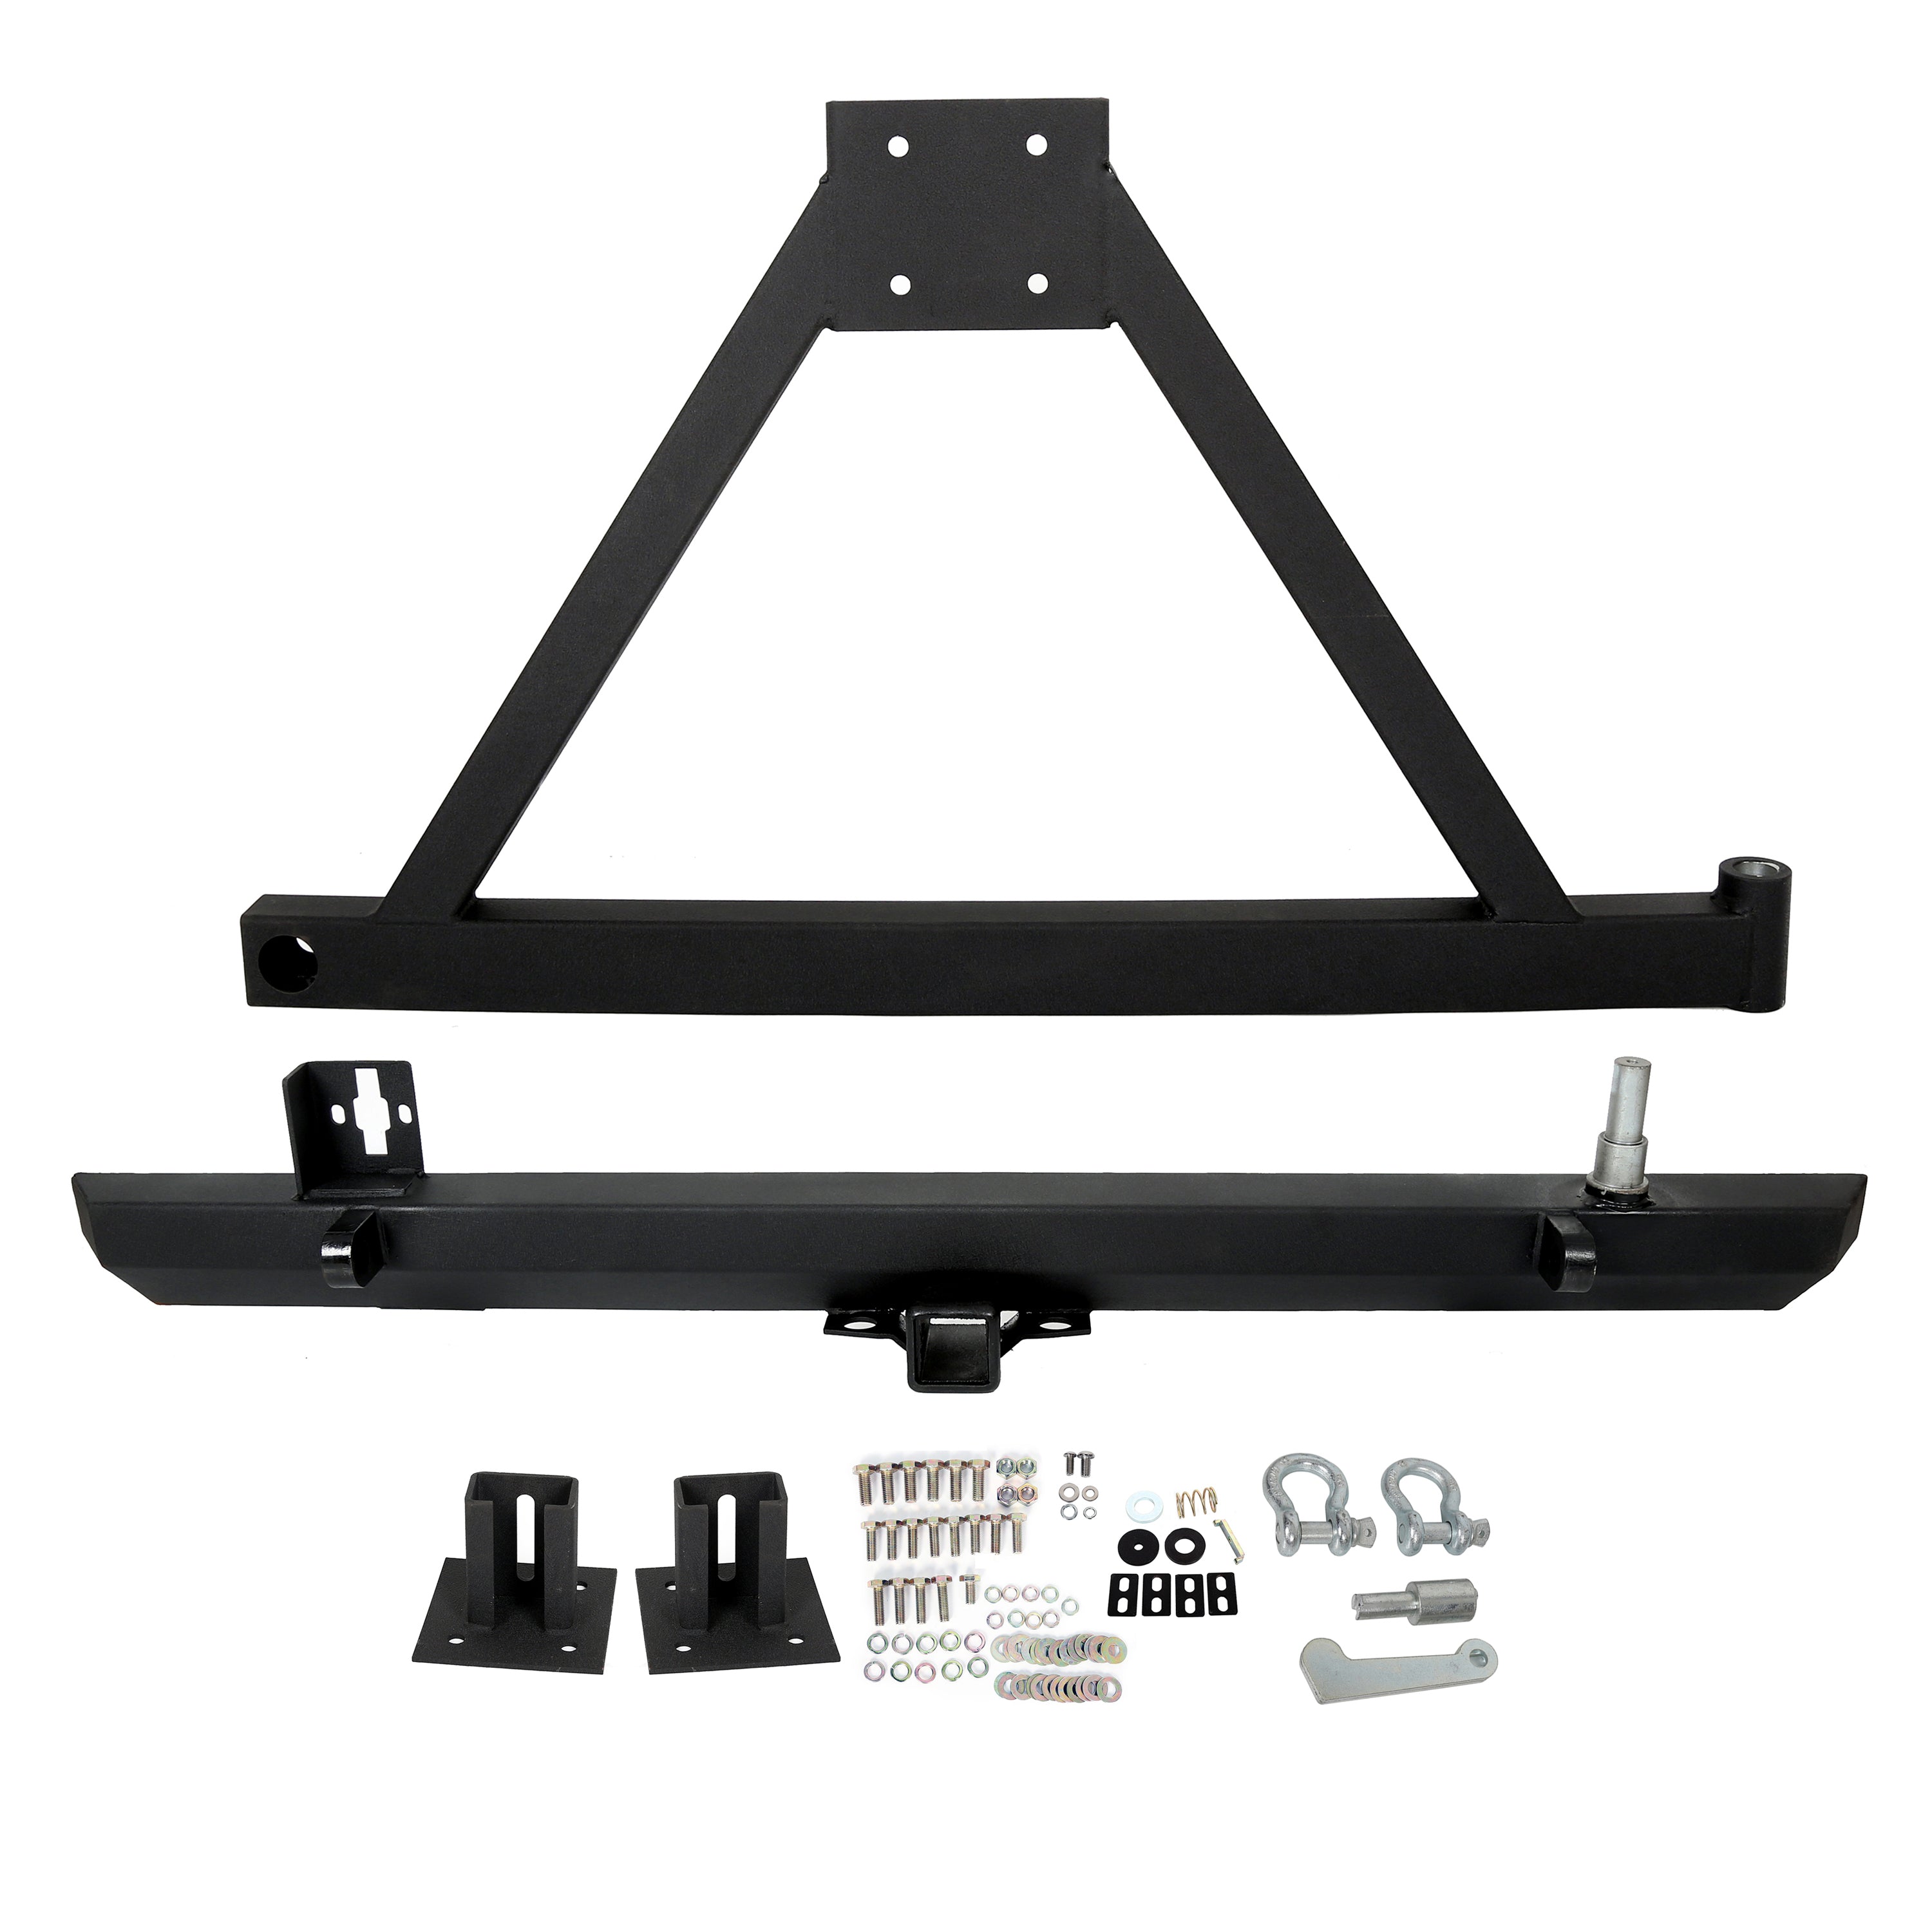 MR.GOP-Rear Bumper for 1987-2006 Jeep Wrangler TJ YJ, with Tire Carrier